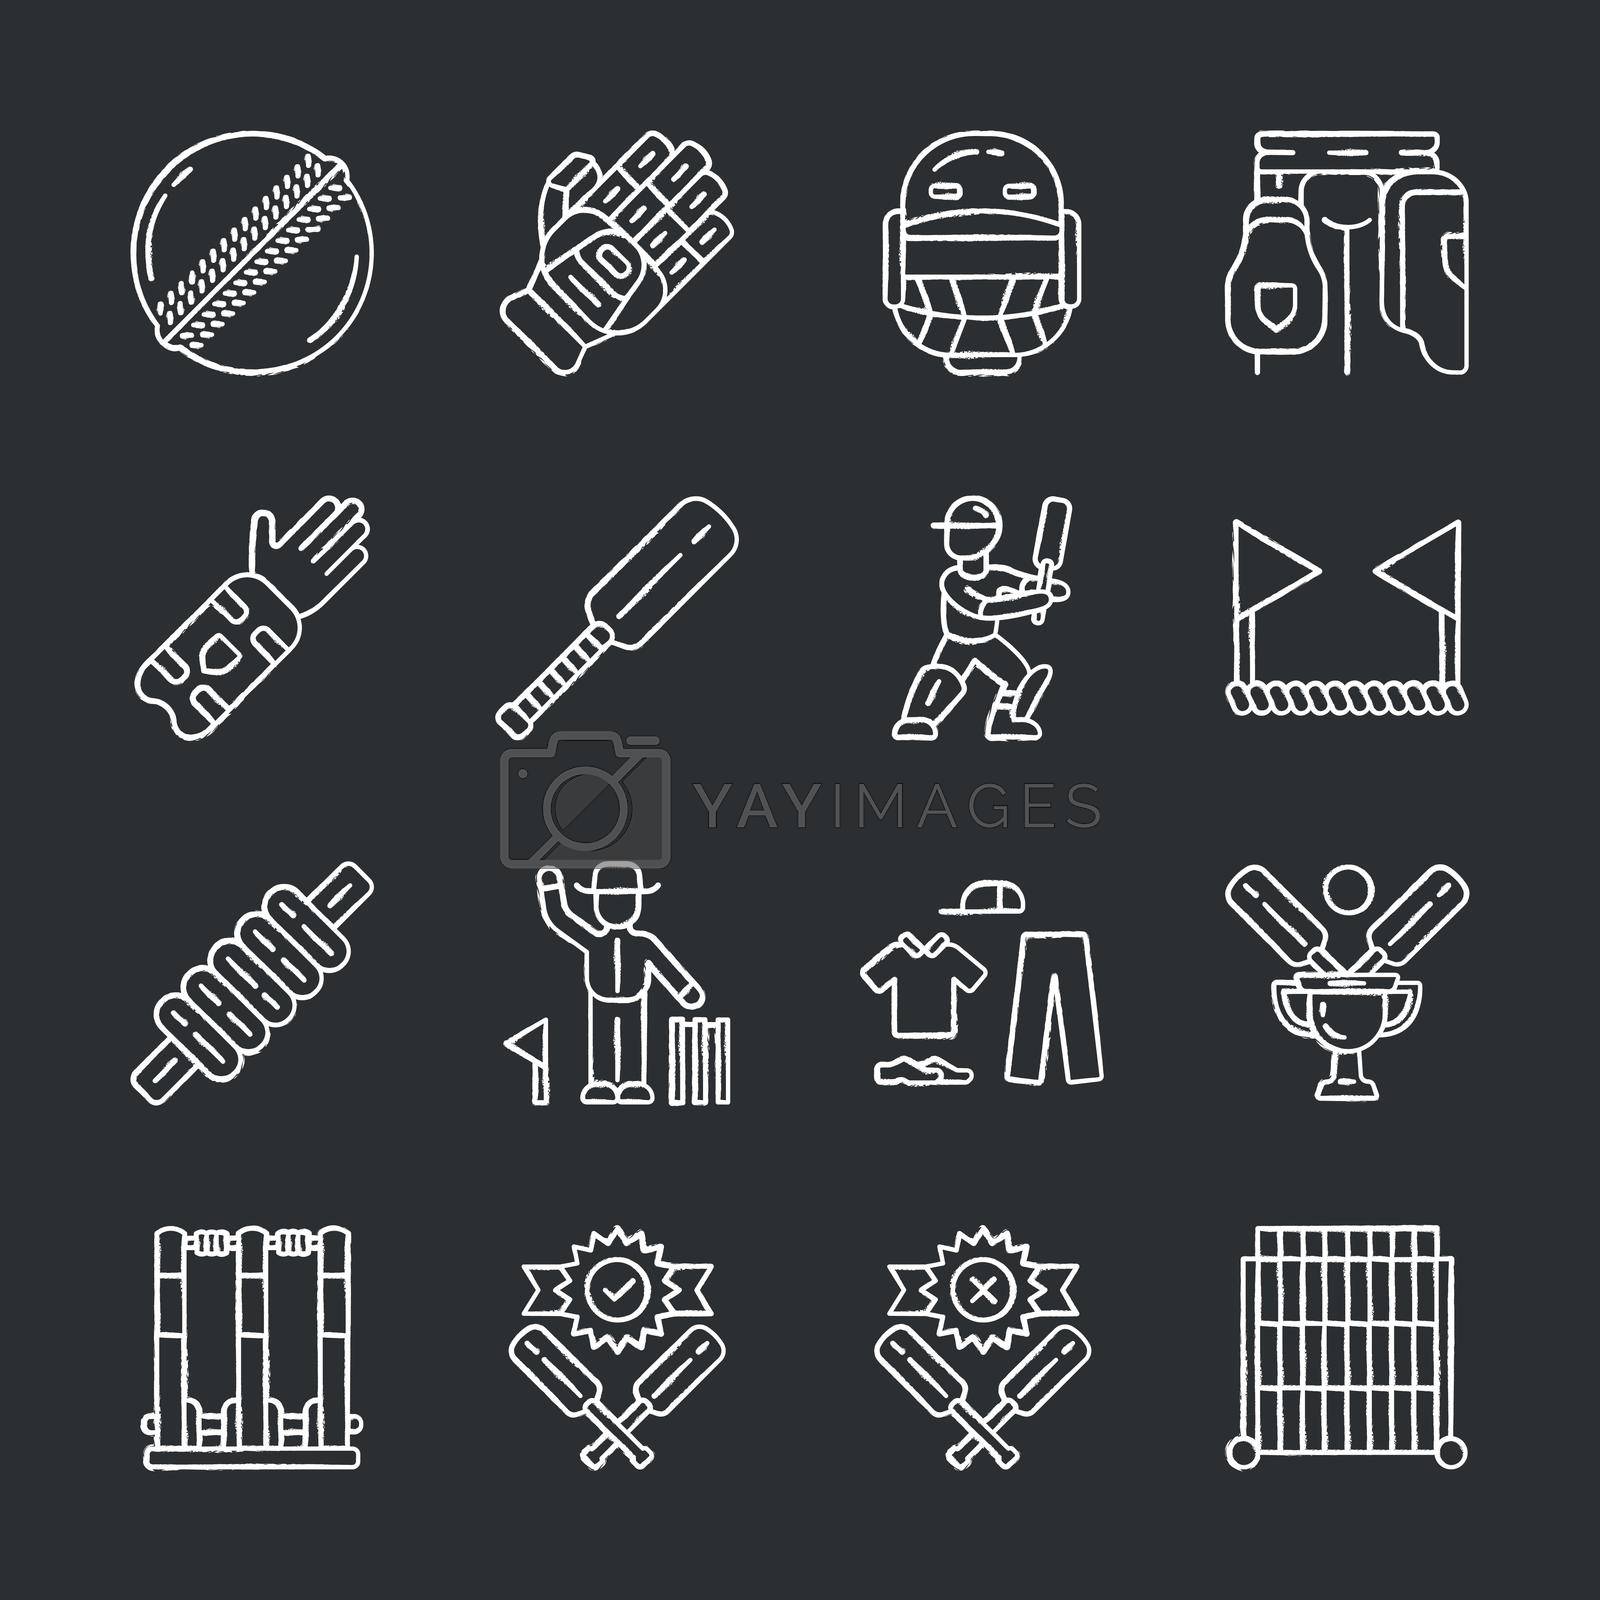 Royalty free image of Cricket championship chalk icons set. Sport uniform, protective gear, game equipment. Outdoor athletic activity. Bat and ball team game. Match preparation. Isolated vector chalkboard illustrations by bsd